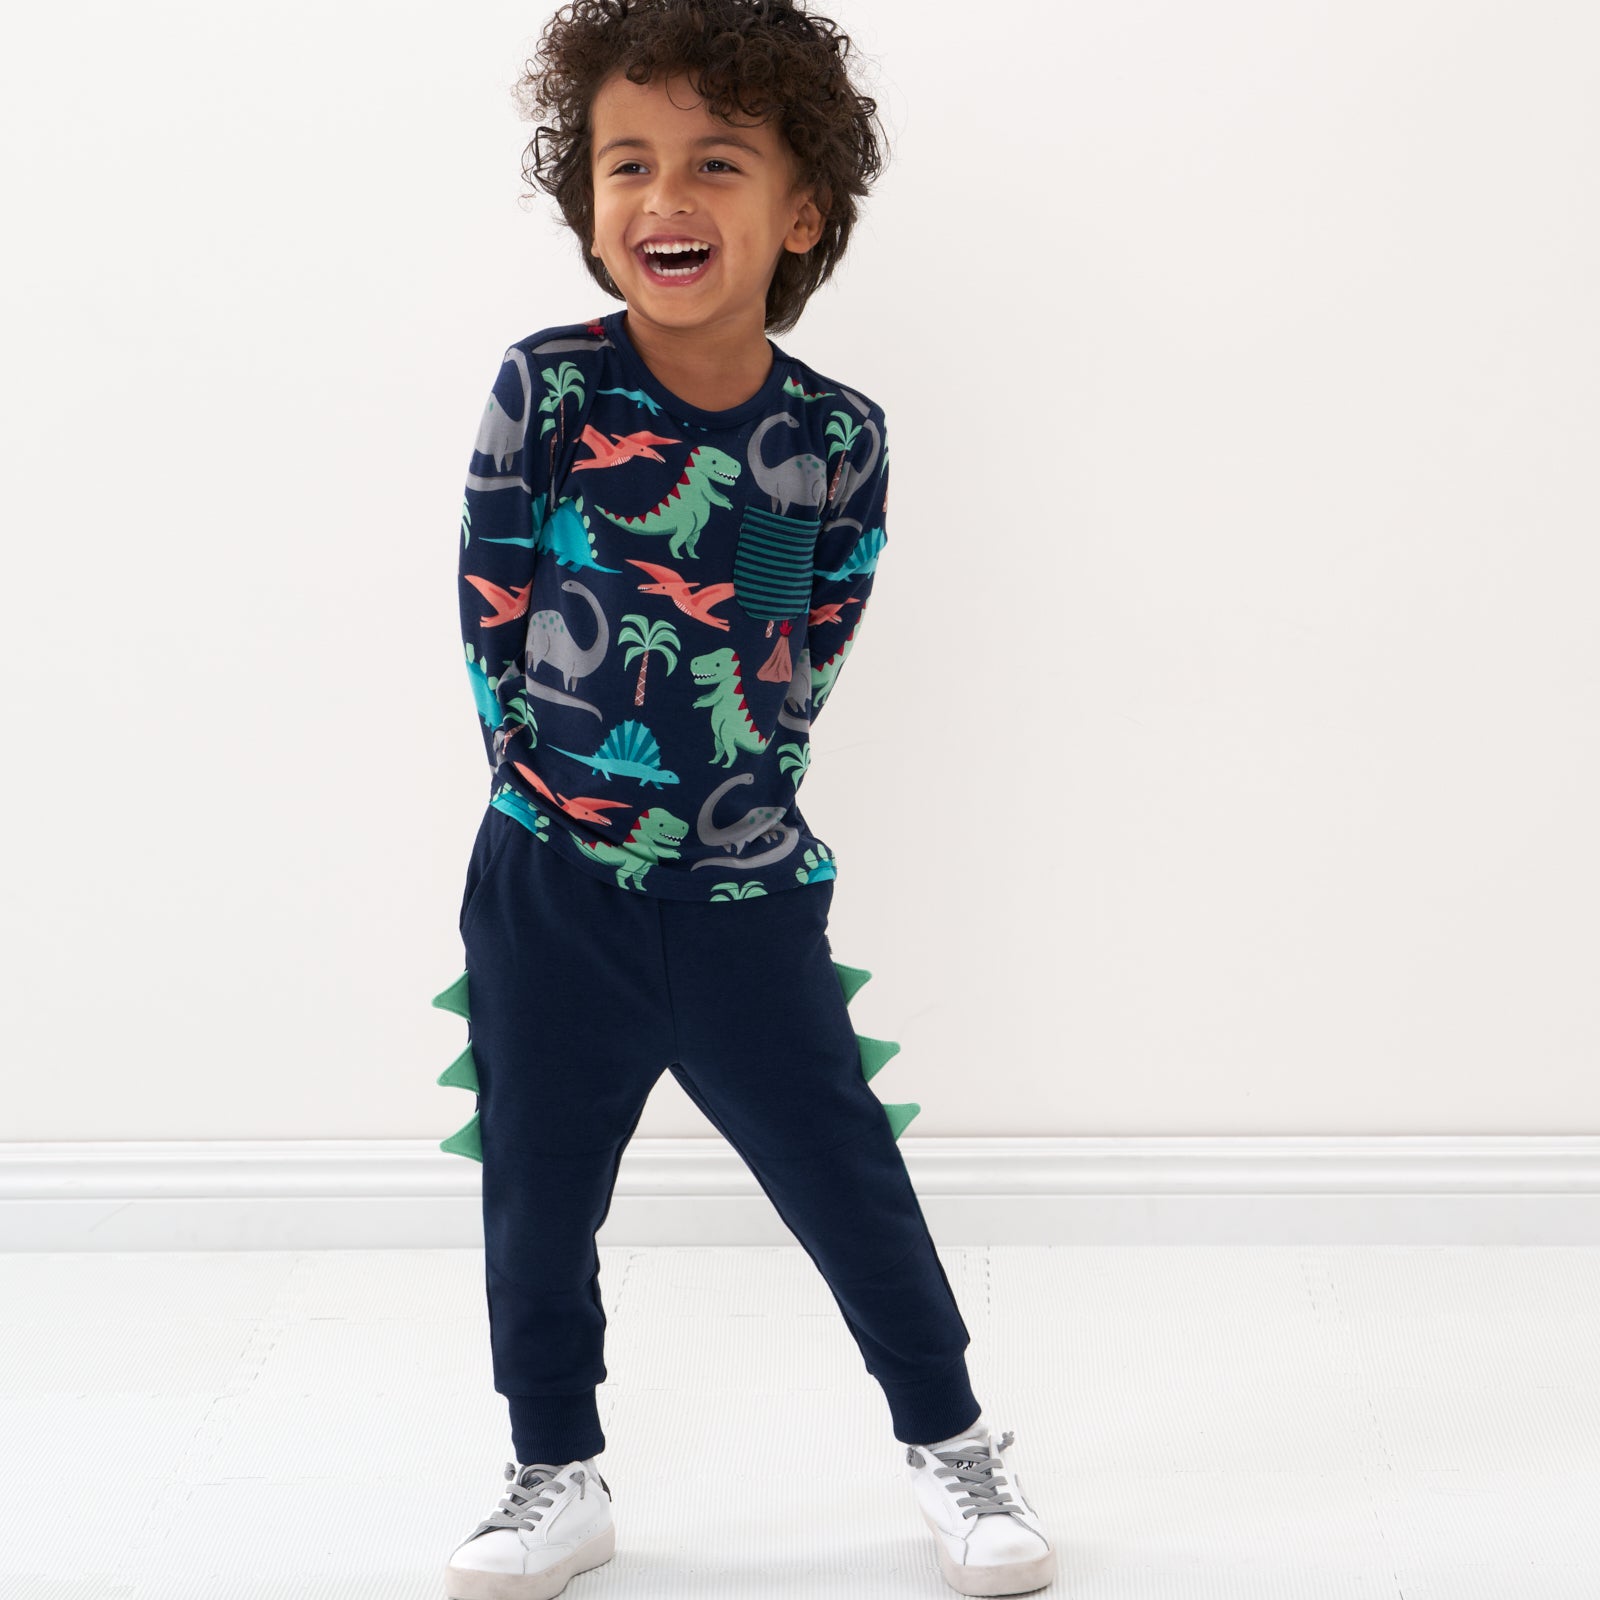 Alternate image of a child wearing Dinosaur joggers and coordinating pocket tee